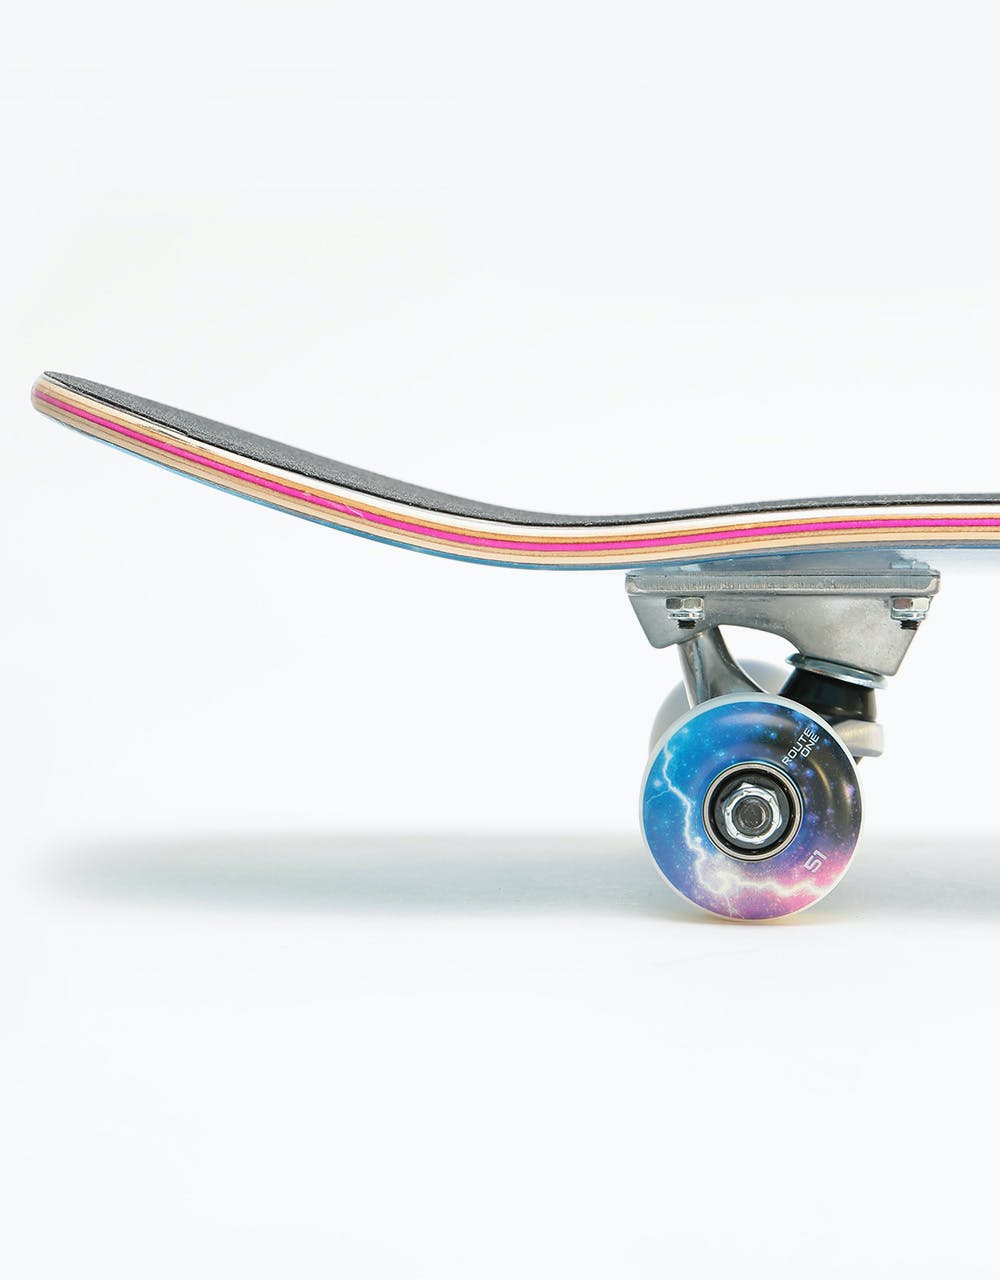 Route One Flare Complete Skateboard - 7.25"